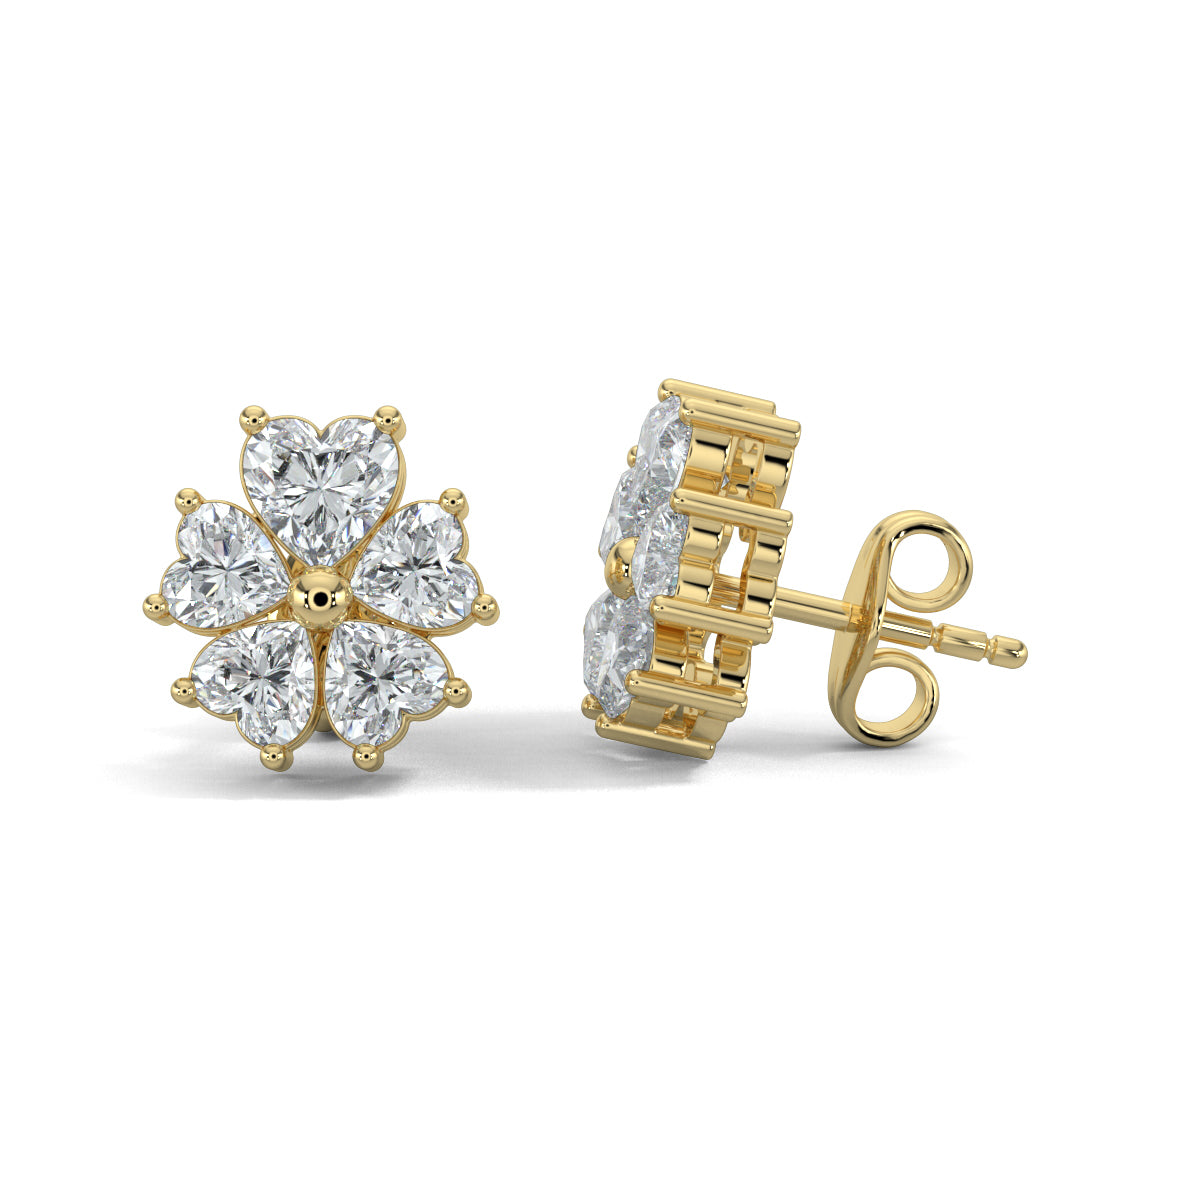 Yellow Gold, Diamond earrings, natural diamond earrings, lab-grown diamond earrings, Heart-shaped diamond stud earrings, floral diamond earrings, Forever Yours collection, flower-shaped earrings